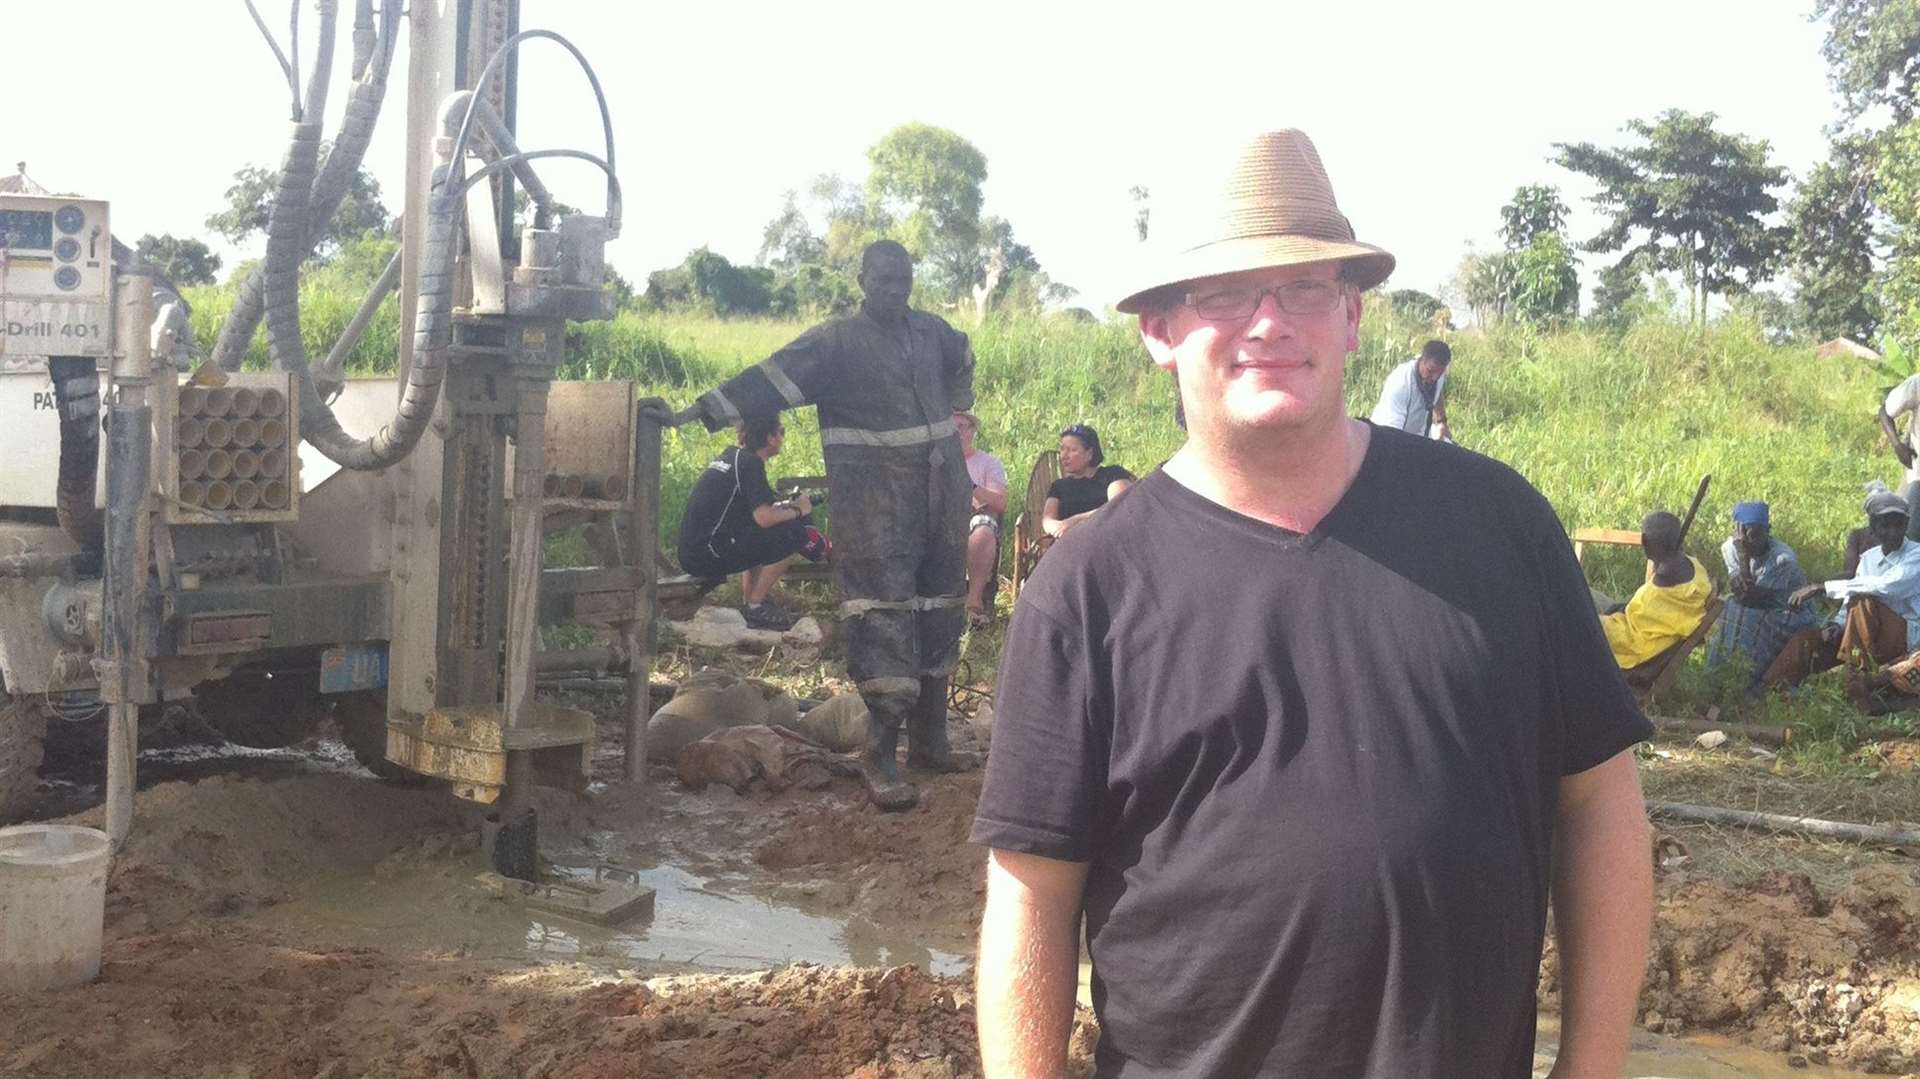 HatHats founder Louis Hurst at the bore hole drilling in Uganda